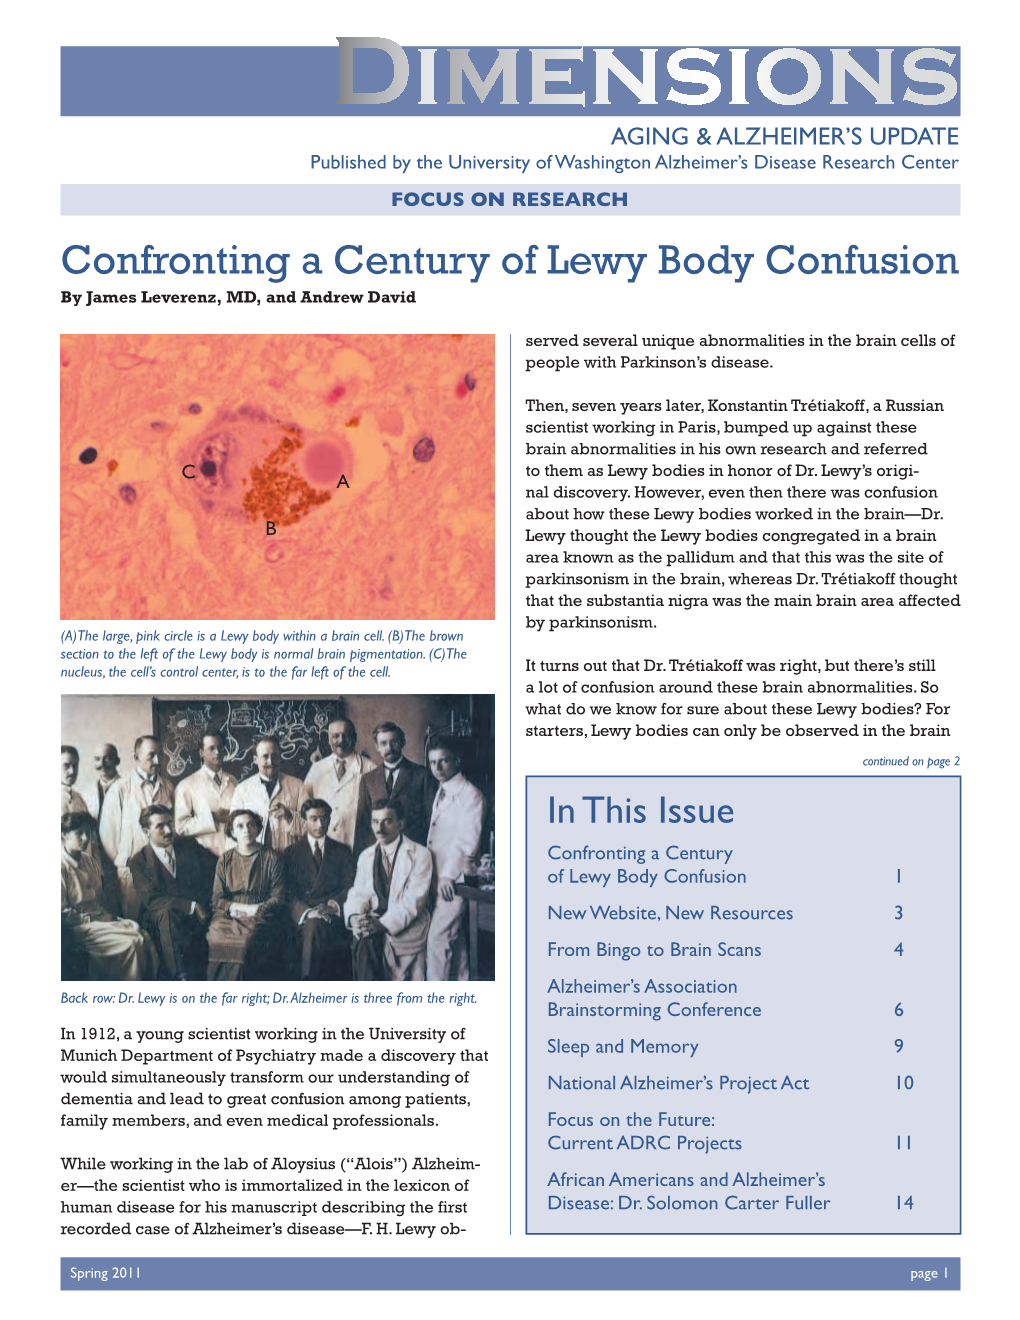 Confronting a Century of Lewy Body Confusion by James Leverenz, MD, and Andrew David